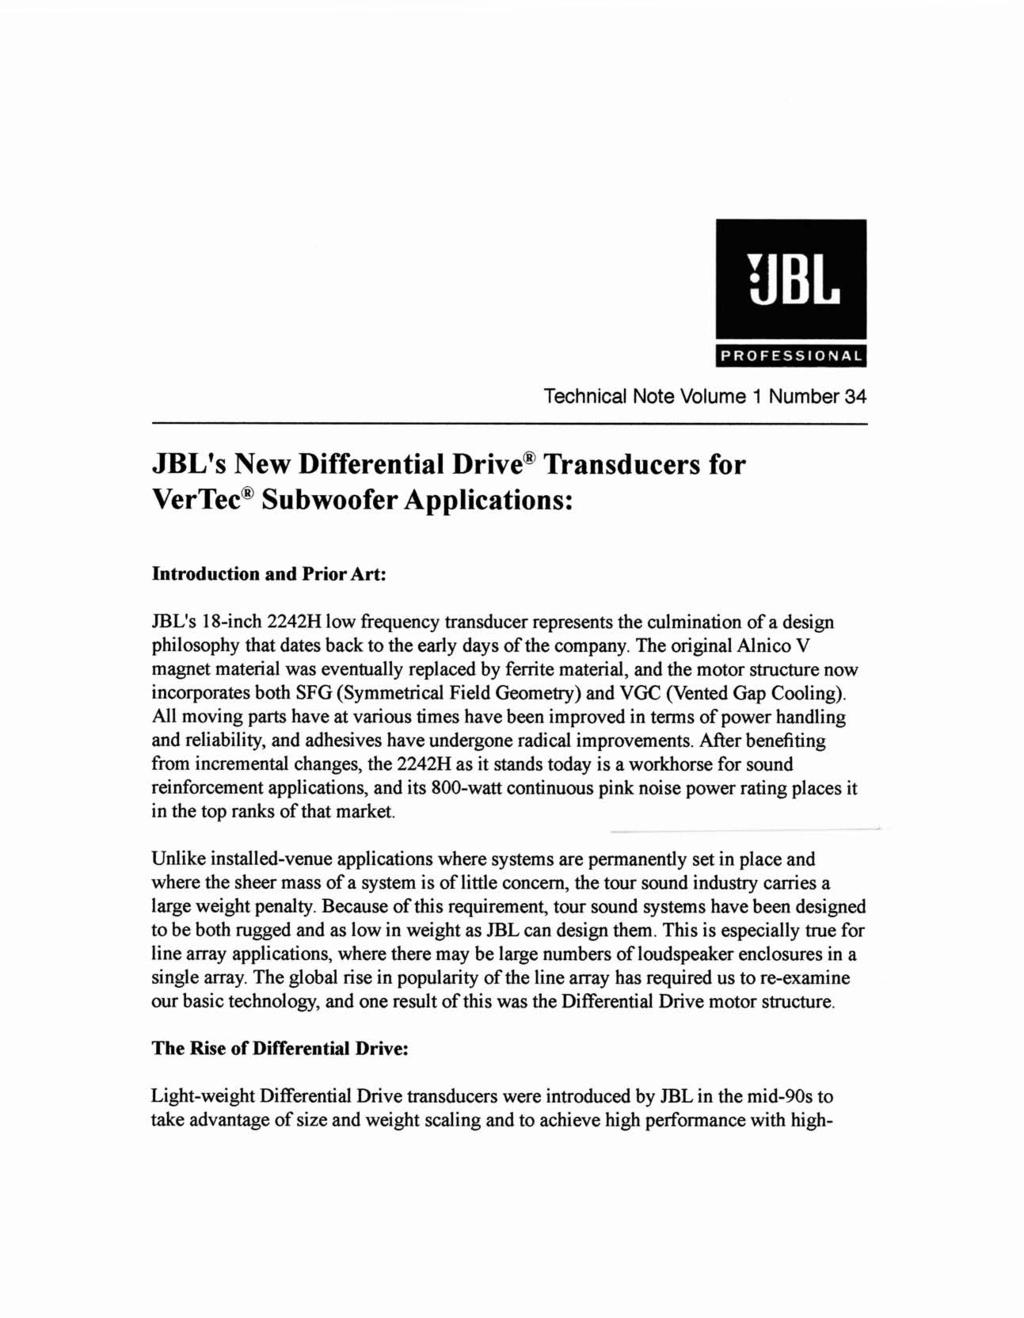 JBL PROFESSIONAL Technical Note Volume 1 Number 34 JBL f s New Differential Drive Transducers for VerTec Subwoofer Applications: Introduction and Prior Art: JBL's 18-inch 2242H low frequency